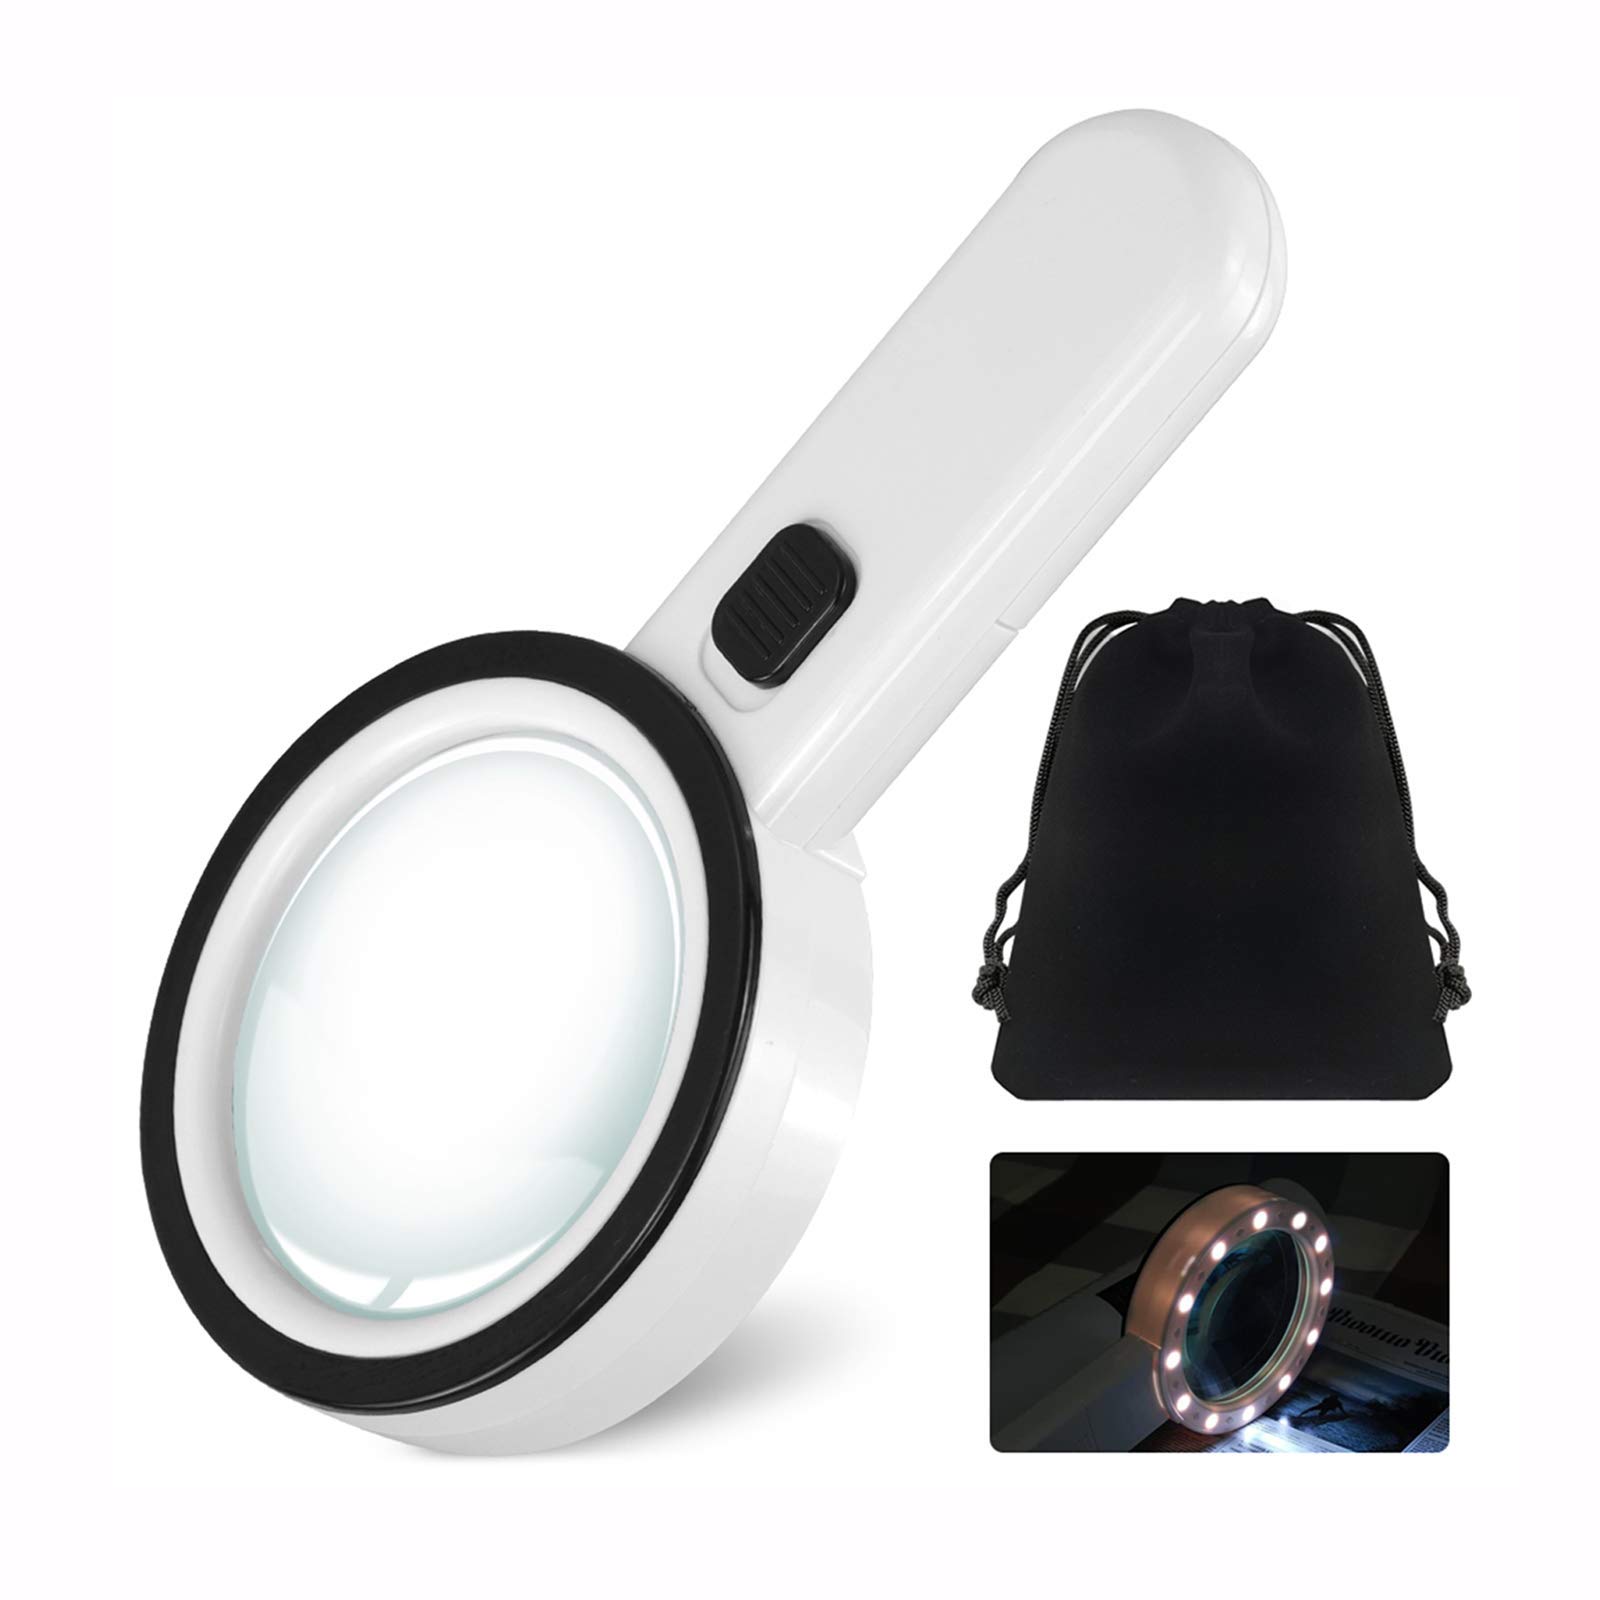 Magnifying Glasses with Light, LED Rechargeable Head Magnifier Glasses, Anti-Blue Light 180% Magnification with Dual LED Lights, Hands Free Magnifying